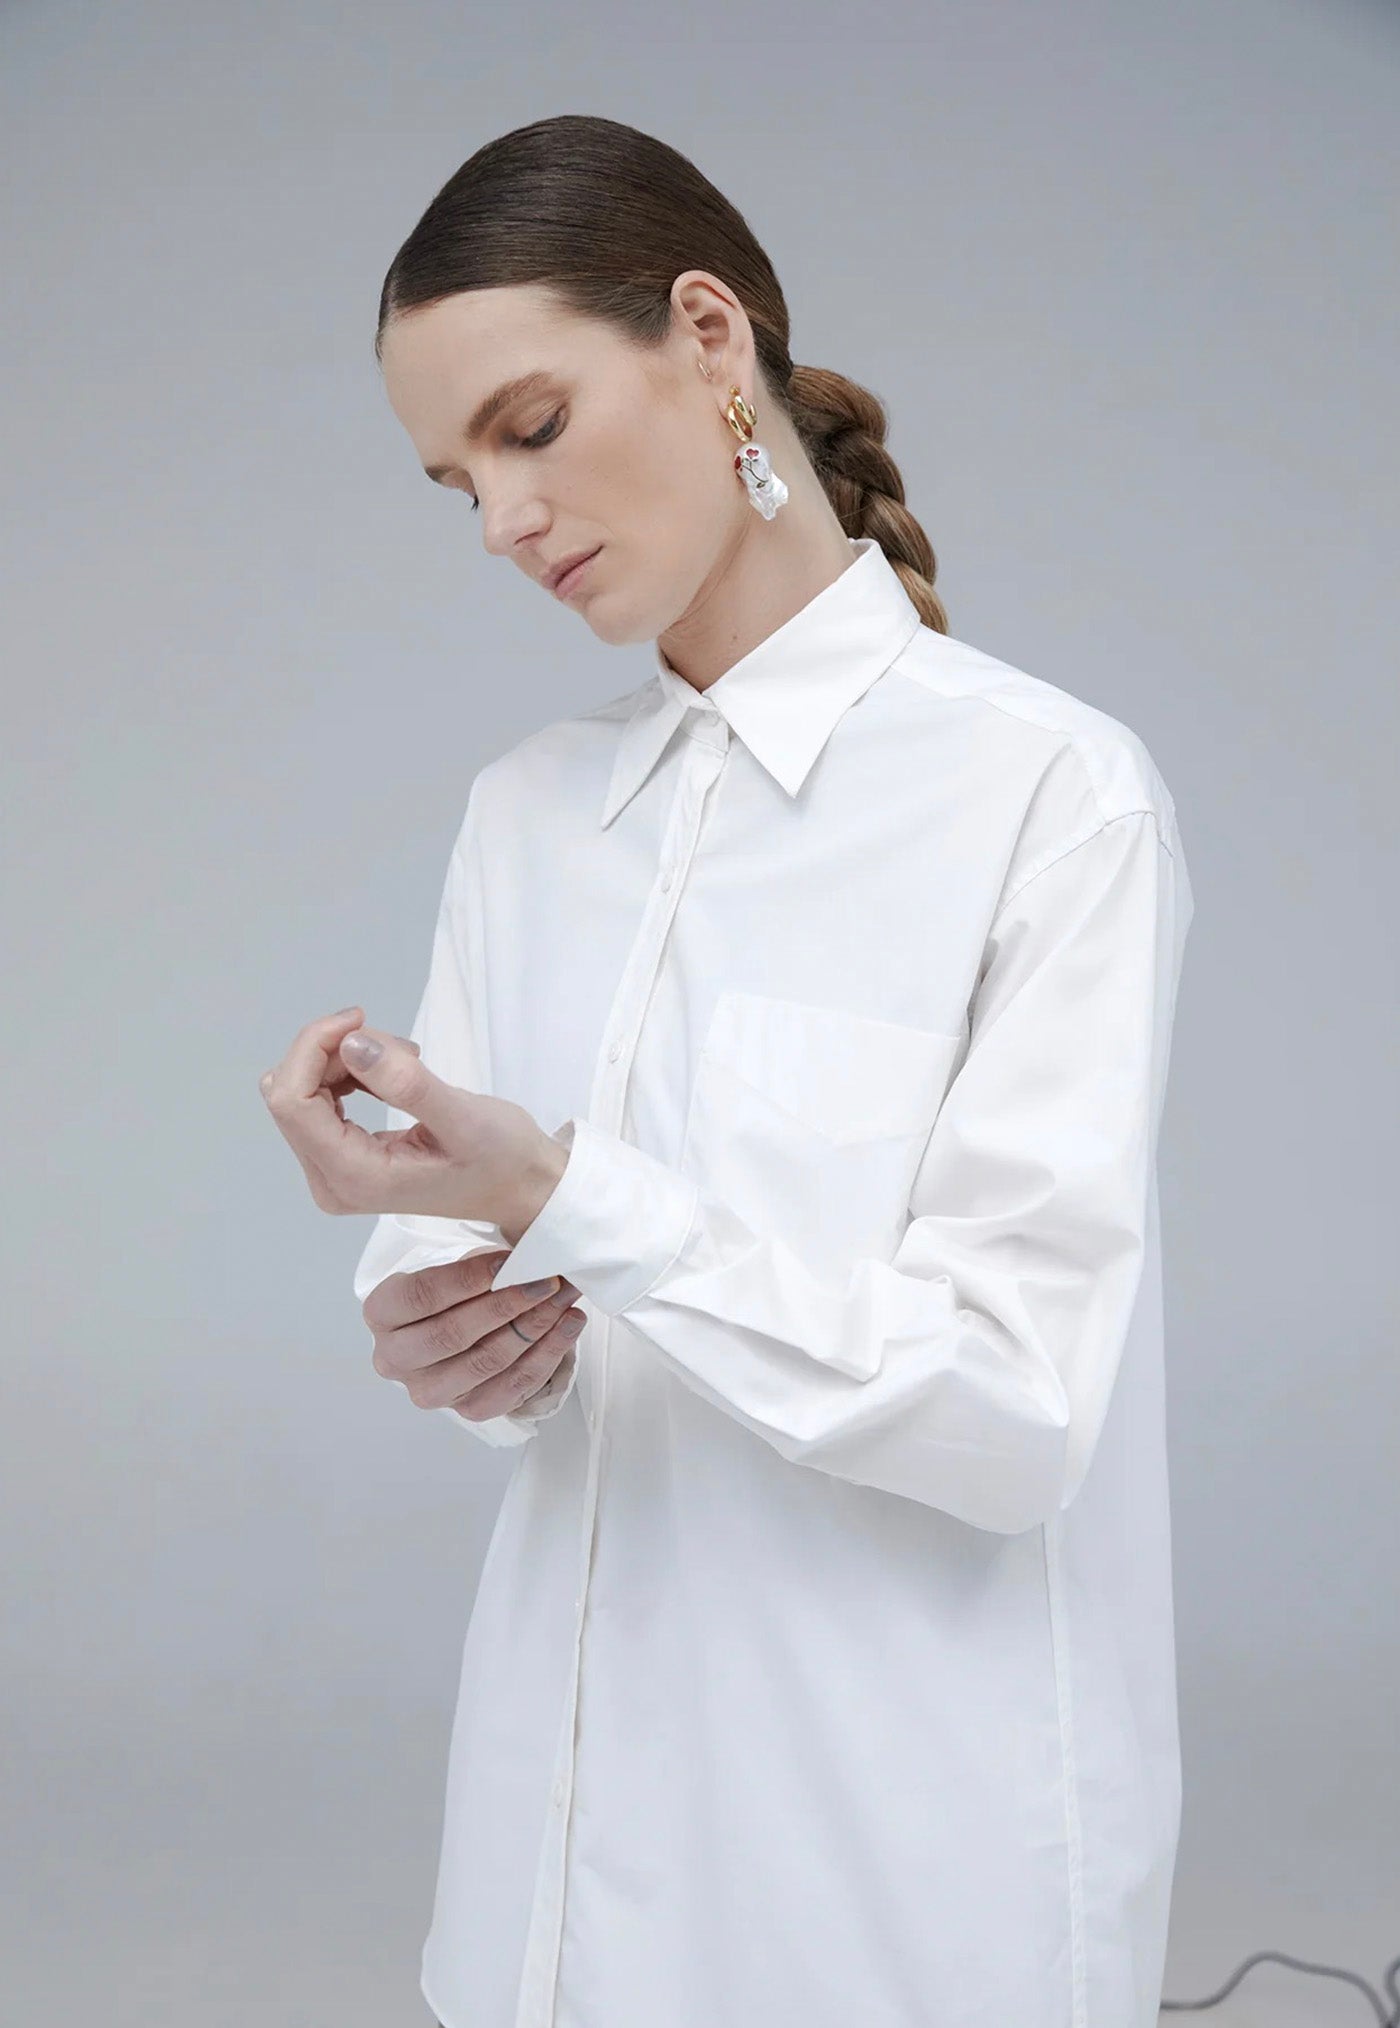 Kantor Shirt - White sold by Angel Divine